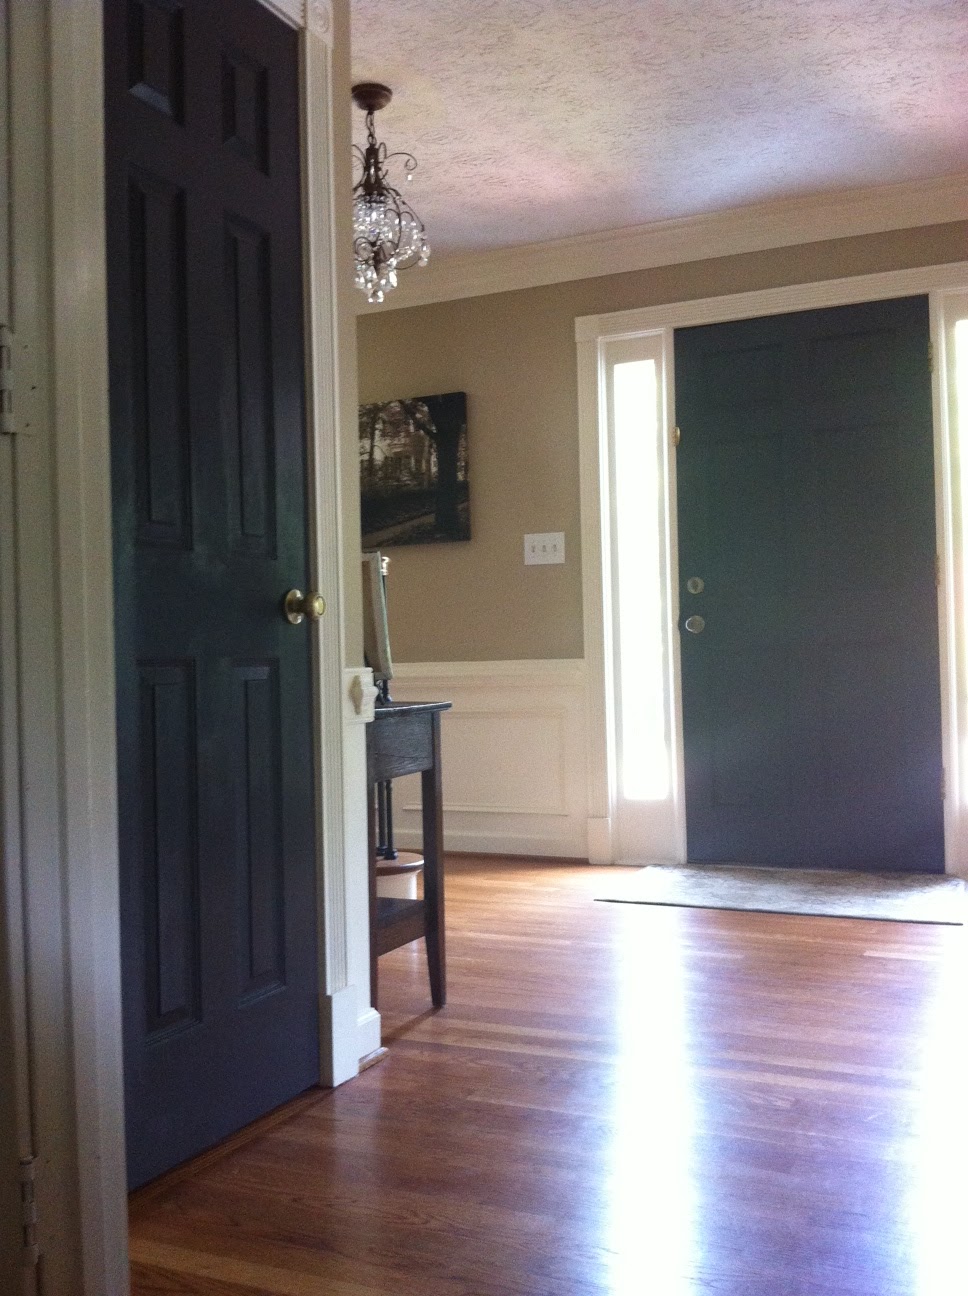 The Houston House Black Doors And Styling Bookcases